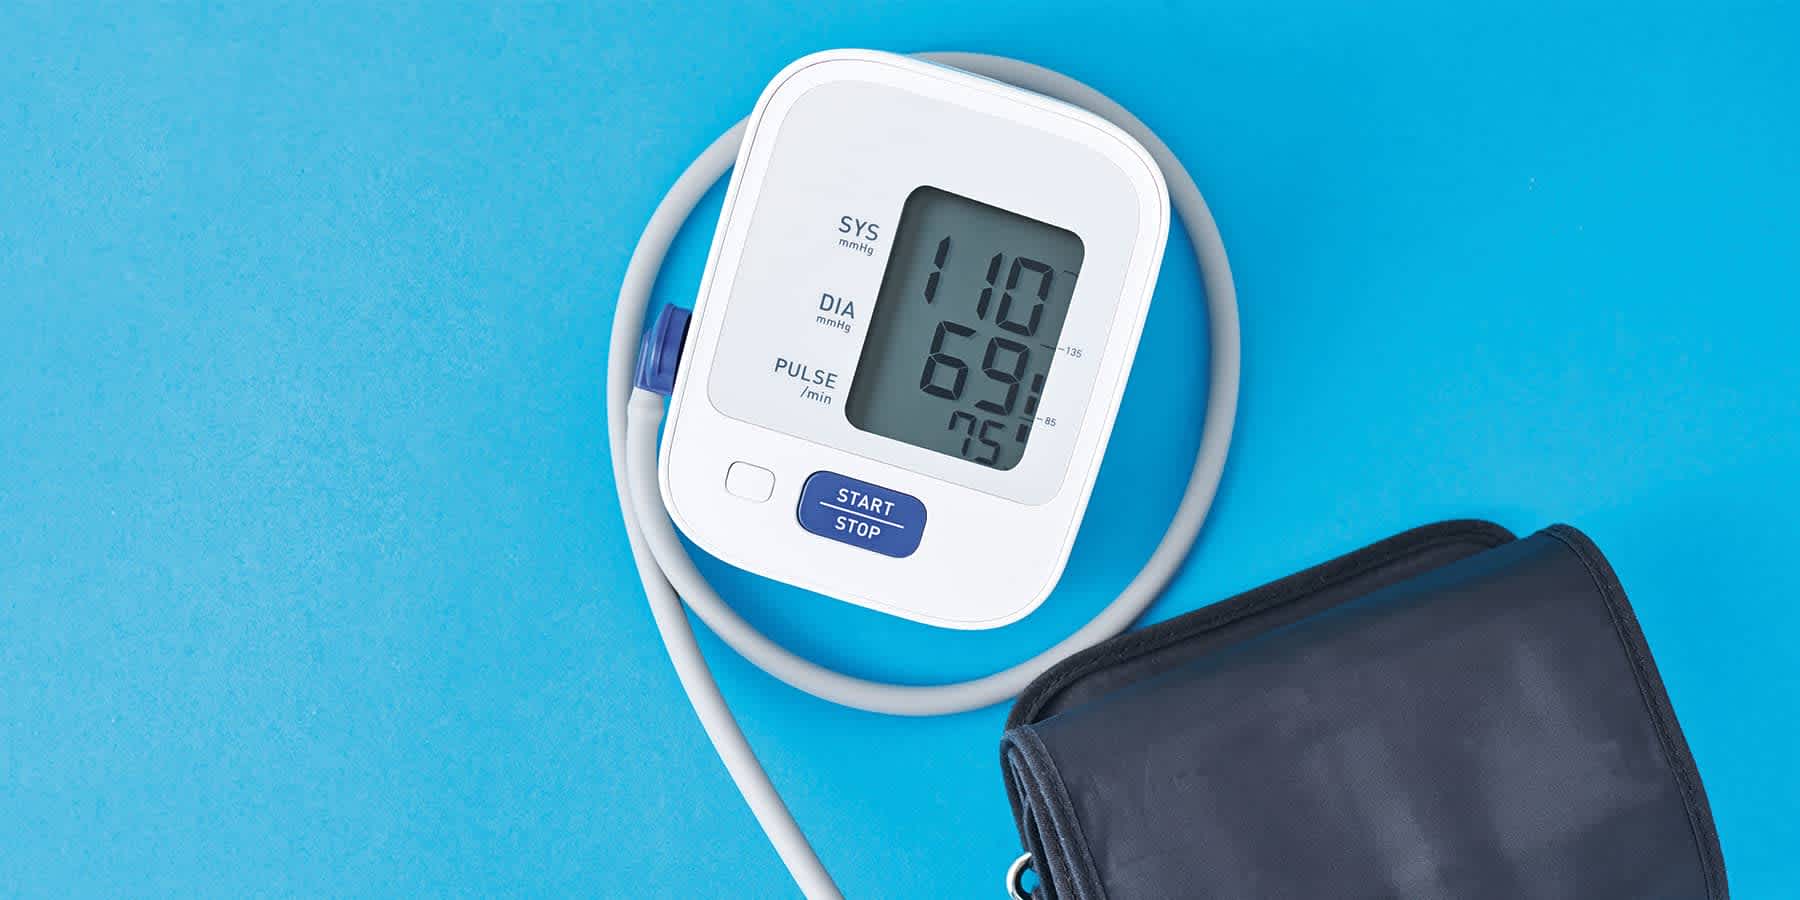 Blood pressure monitor against a blue background